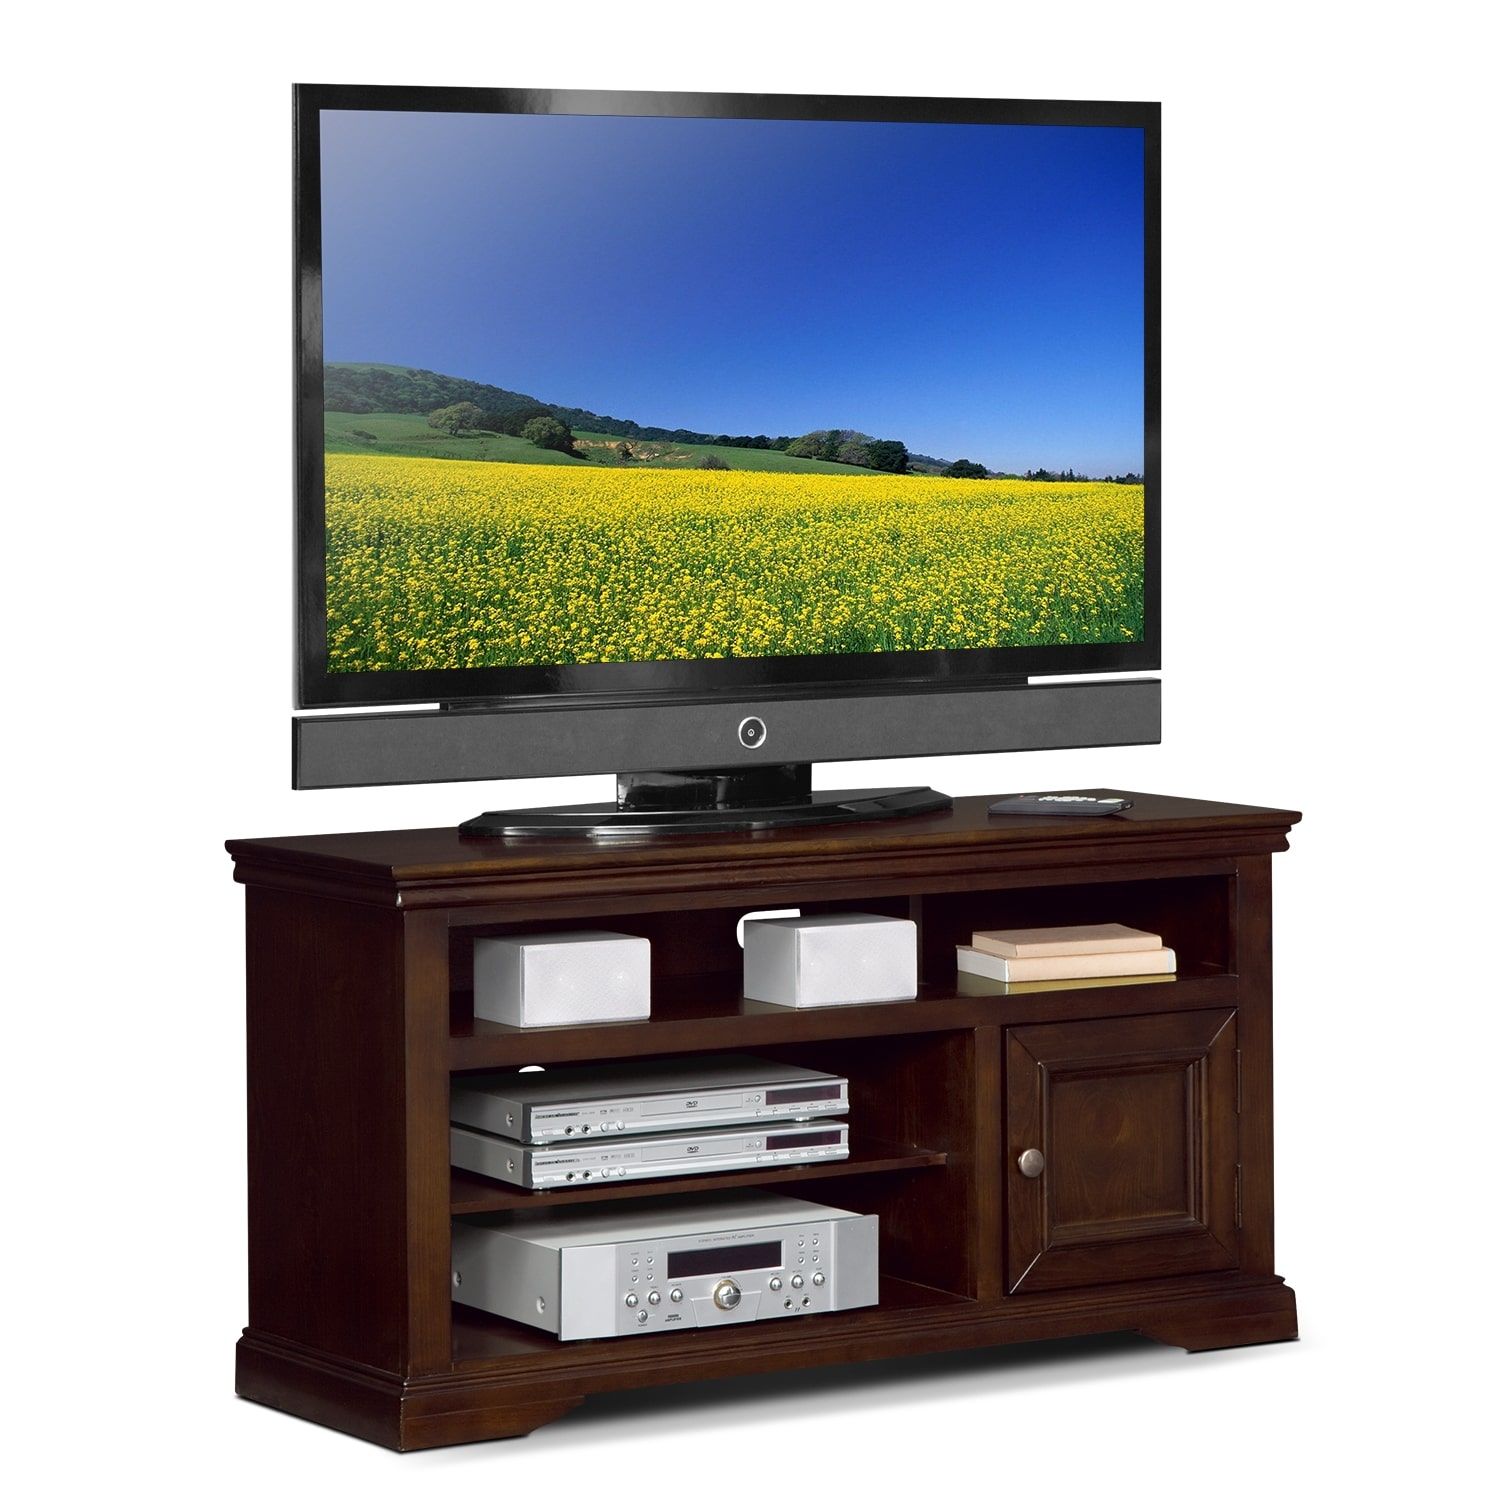 Jenson 50" Tv Stand – Cherry | American Signature Furniture Pertaining To Tracy Tv Stands For Tvs Up To 50" (View 15 of 15)